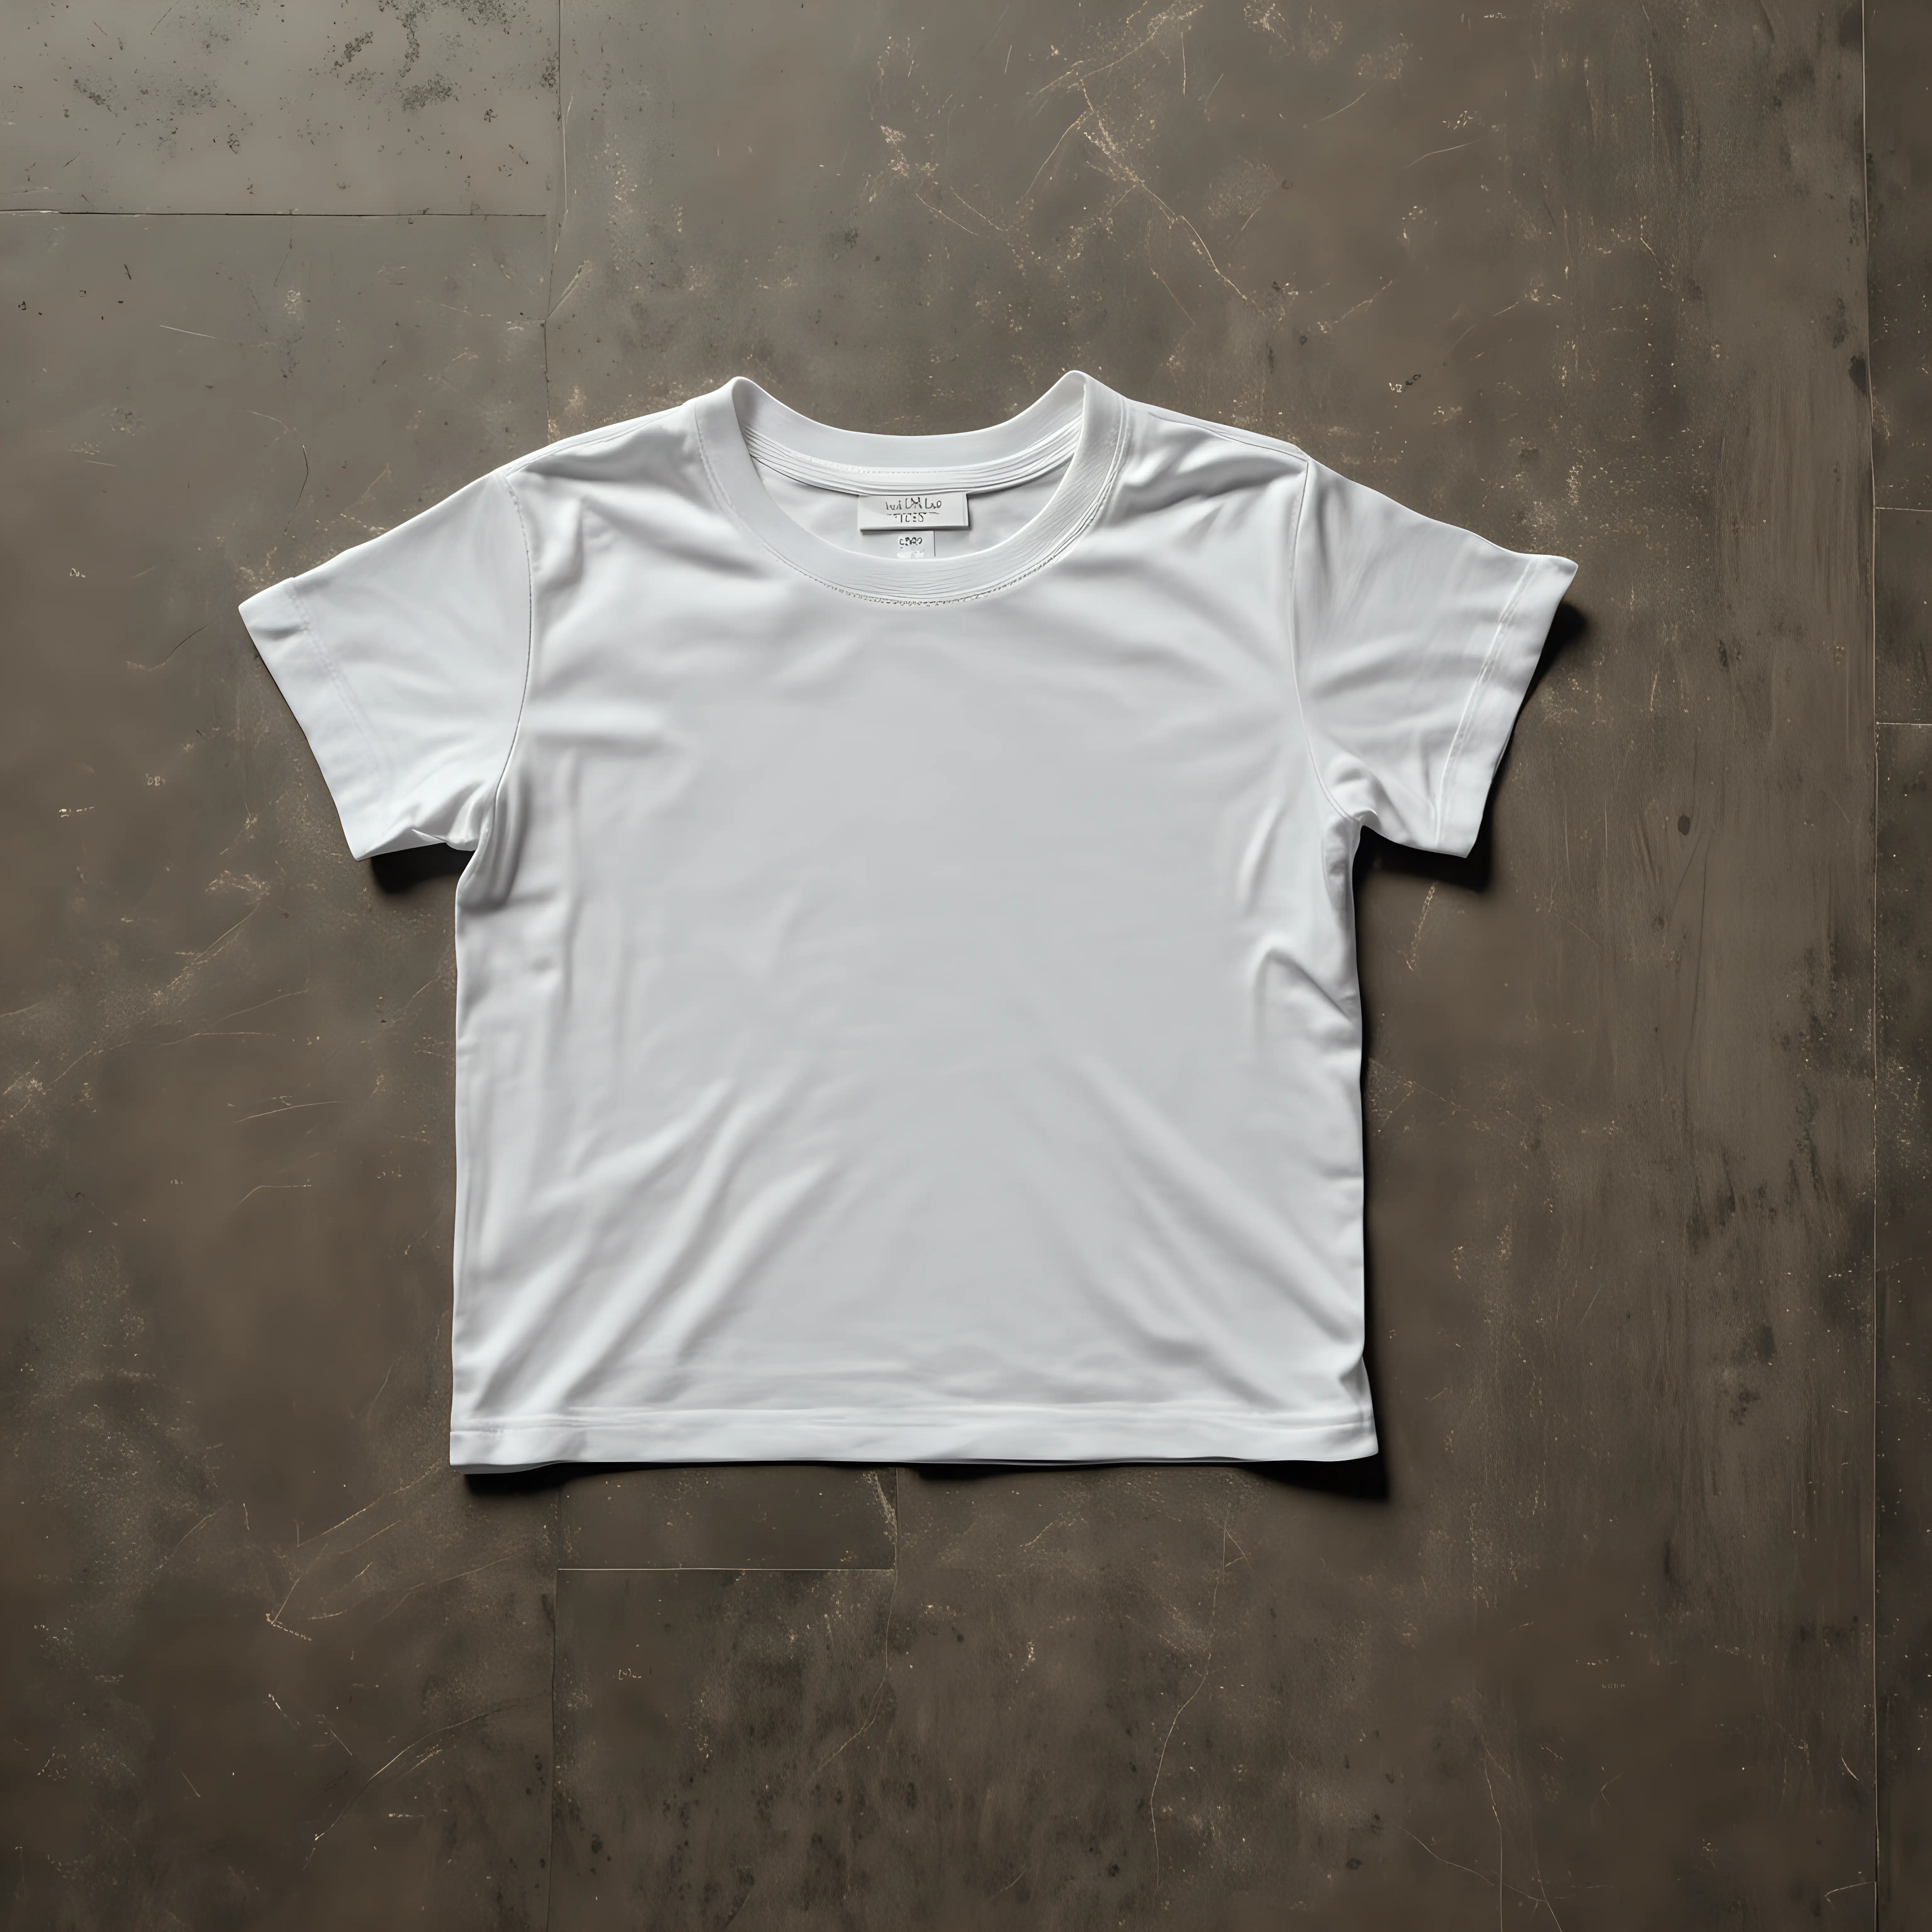 hyper realistic ironed simmetrical proportional white slim toddler tshirt no wrinkles, lied on floor seen from above with solid dark contrasting background textured 
floor